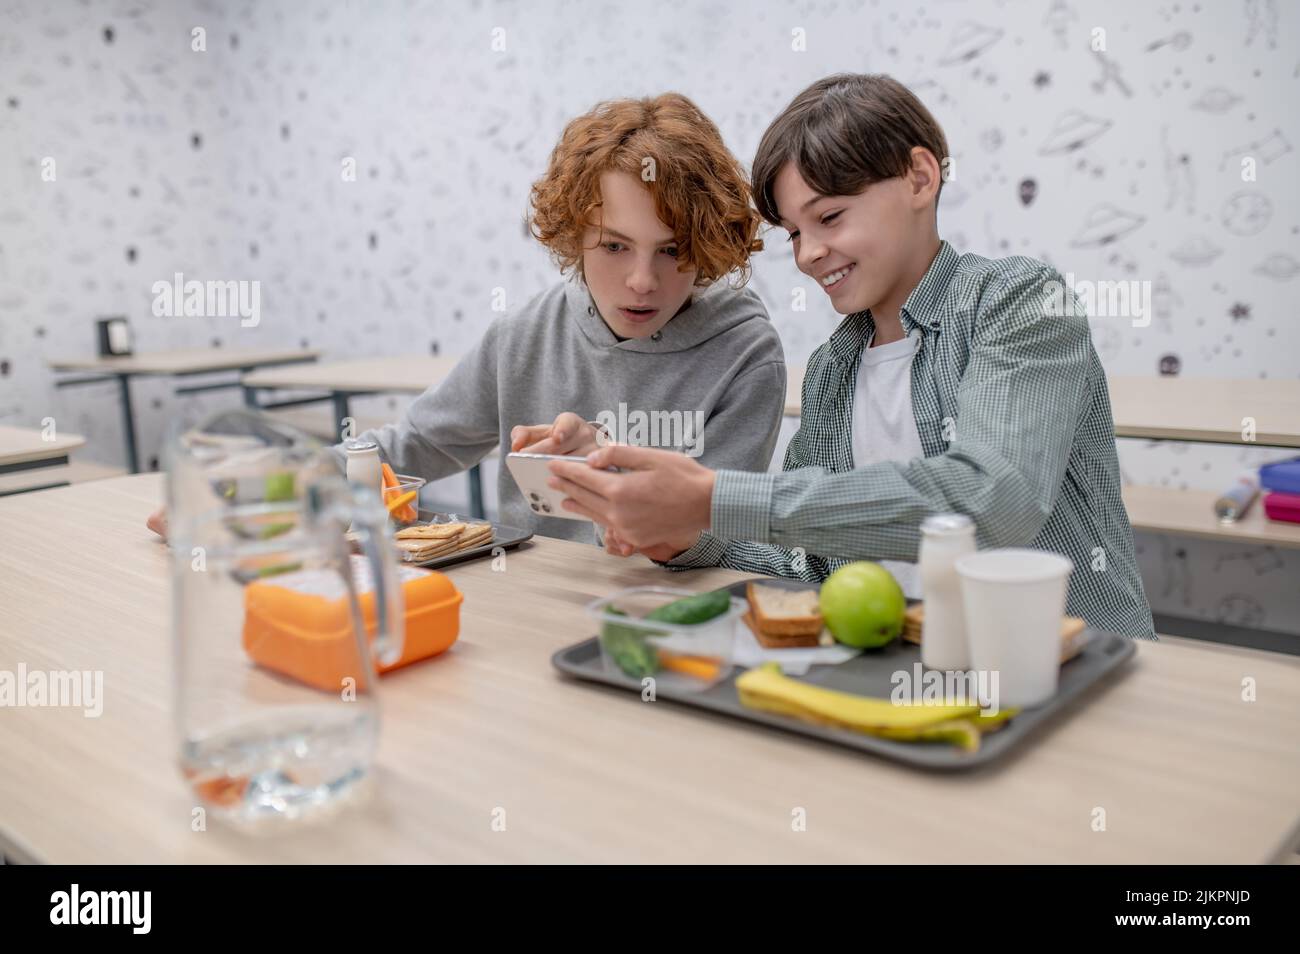 Two school boys having lunch in a school canteen Stock Photo